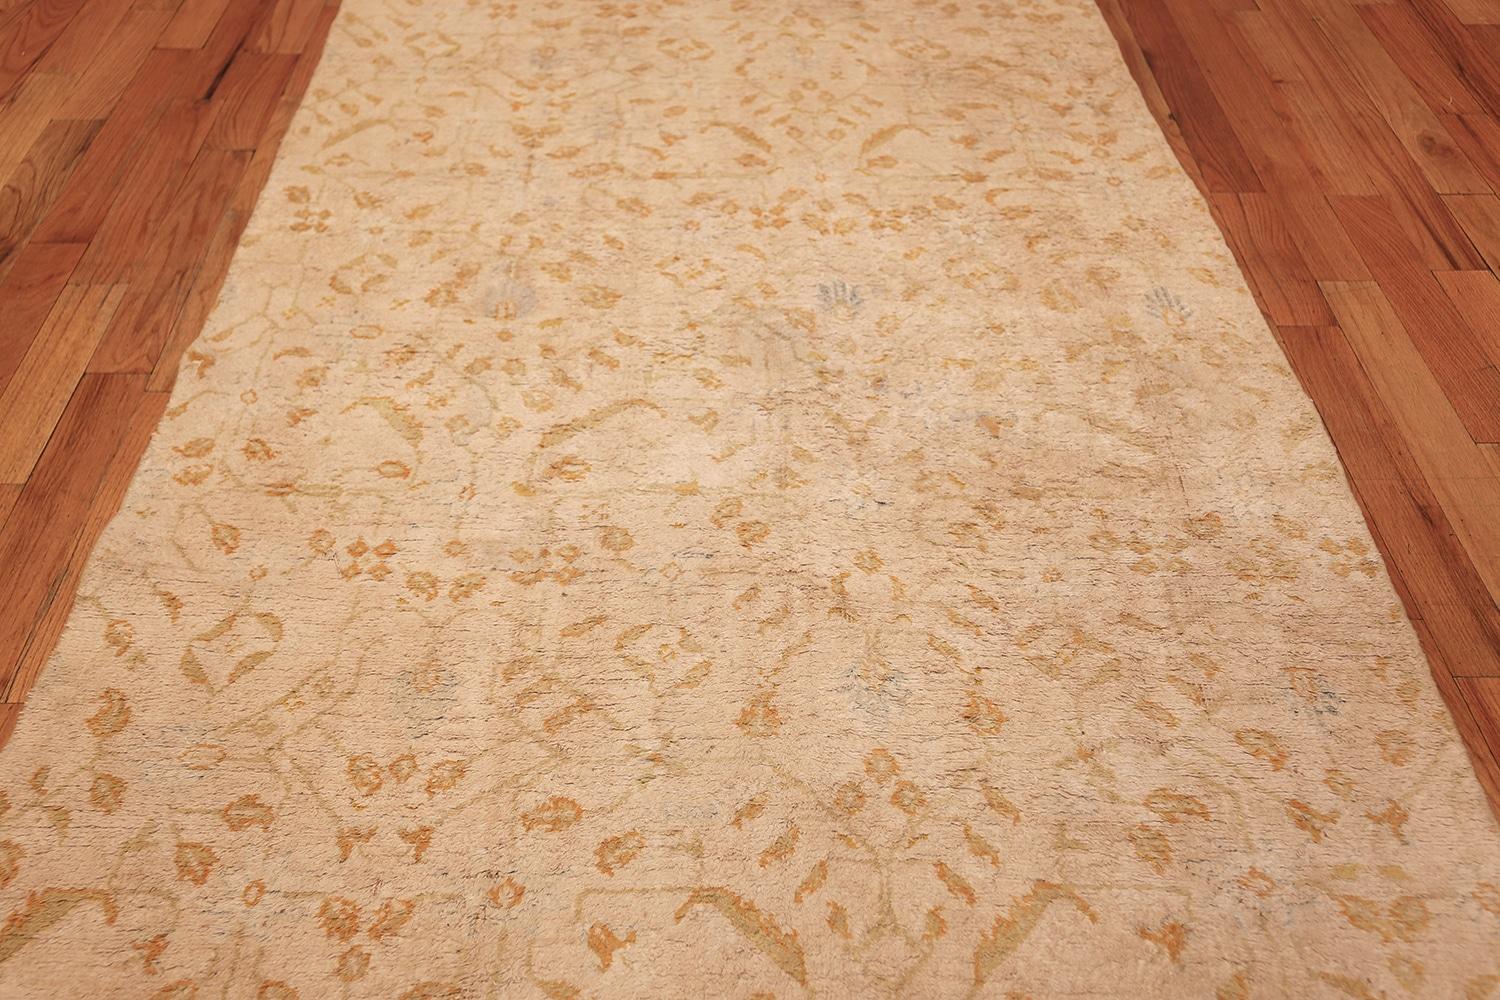 Long and Narrow Luxurious Ivory Indian Agra Antique Runner Rug 4'6